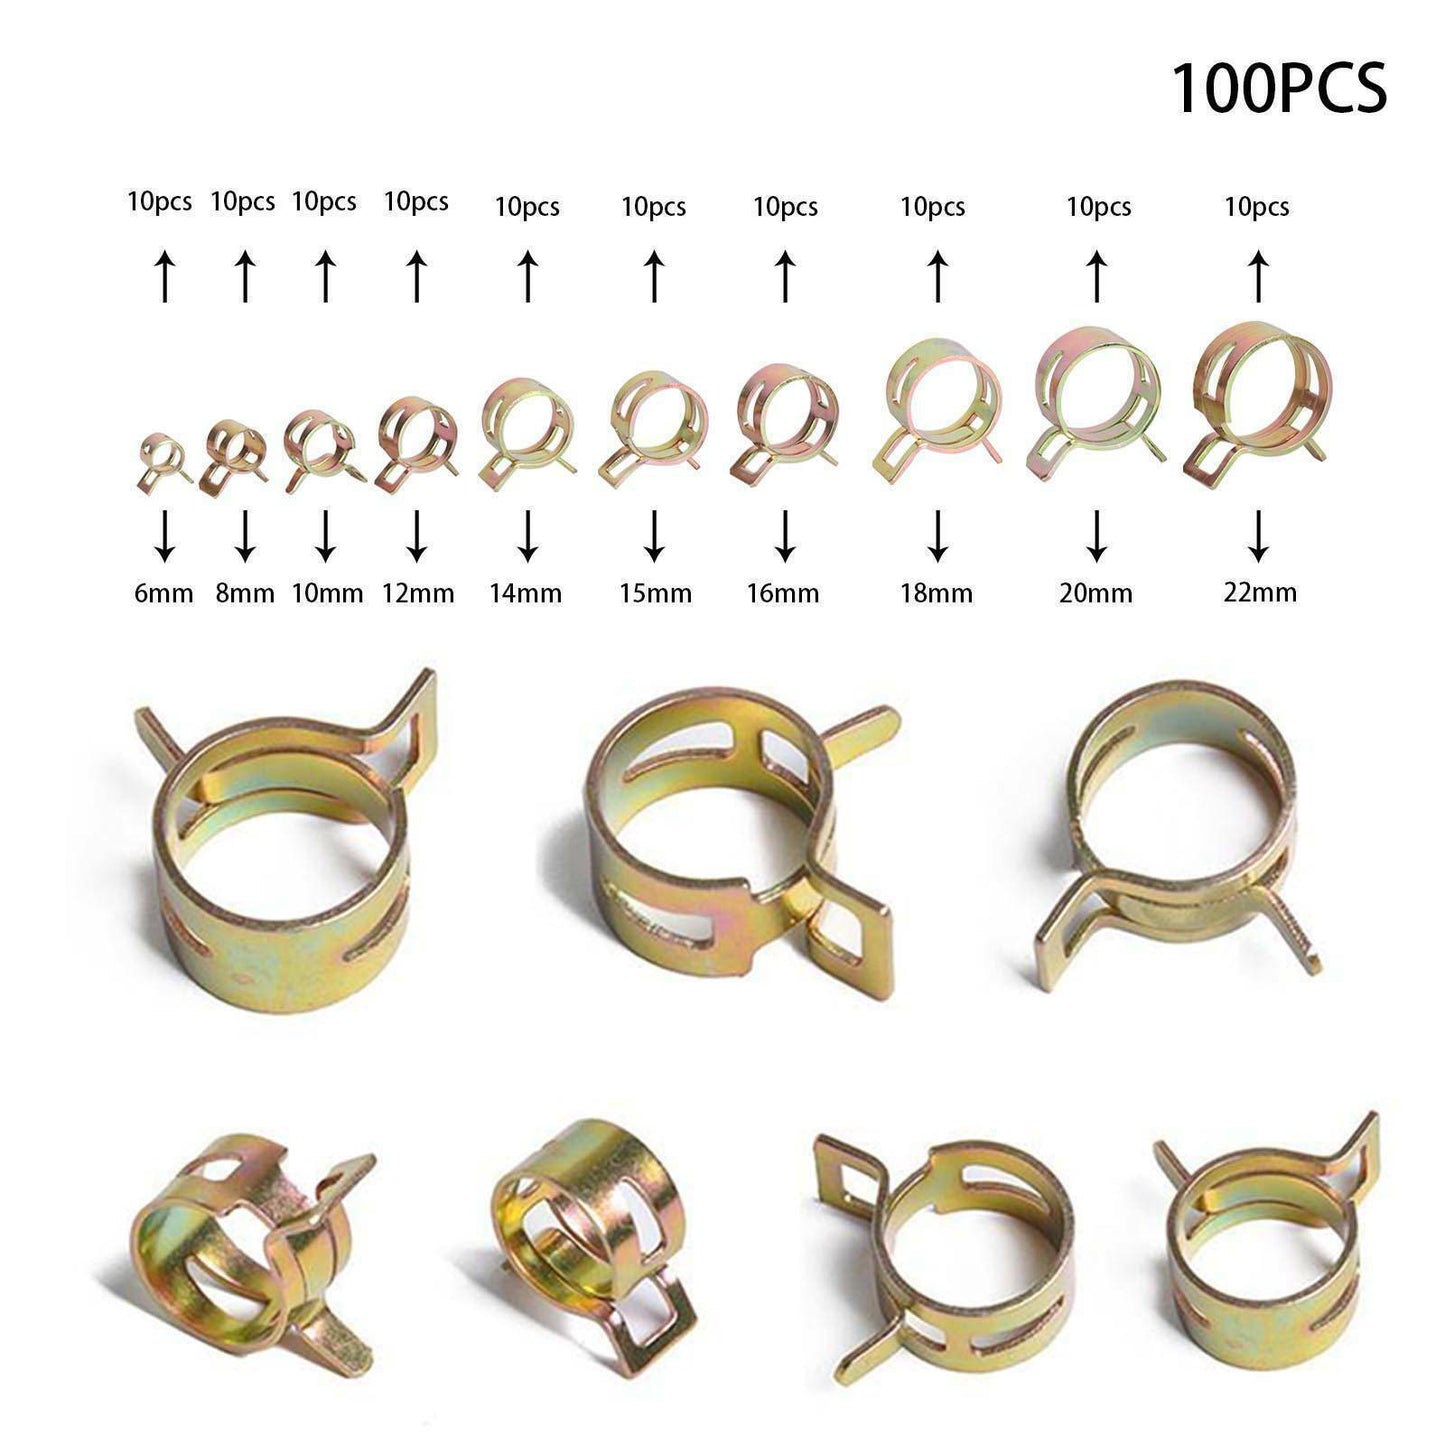 100pcs Steel Spring Clip Hose Clamps 6-22mm Adjustable Range Worm Gear Stainless